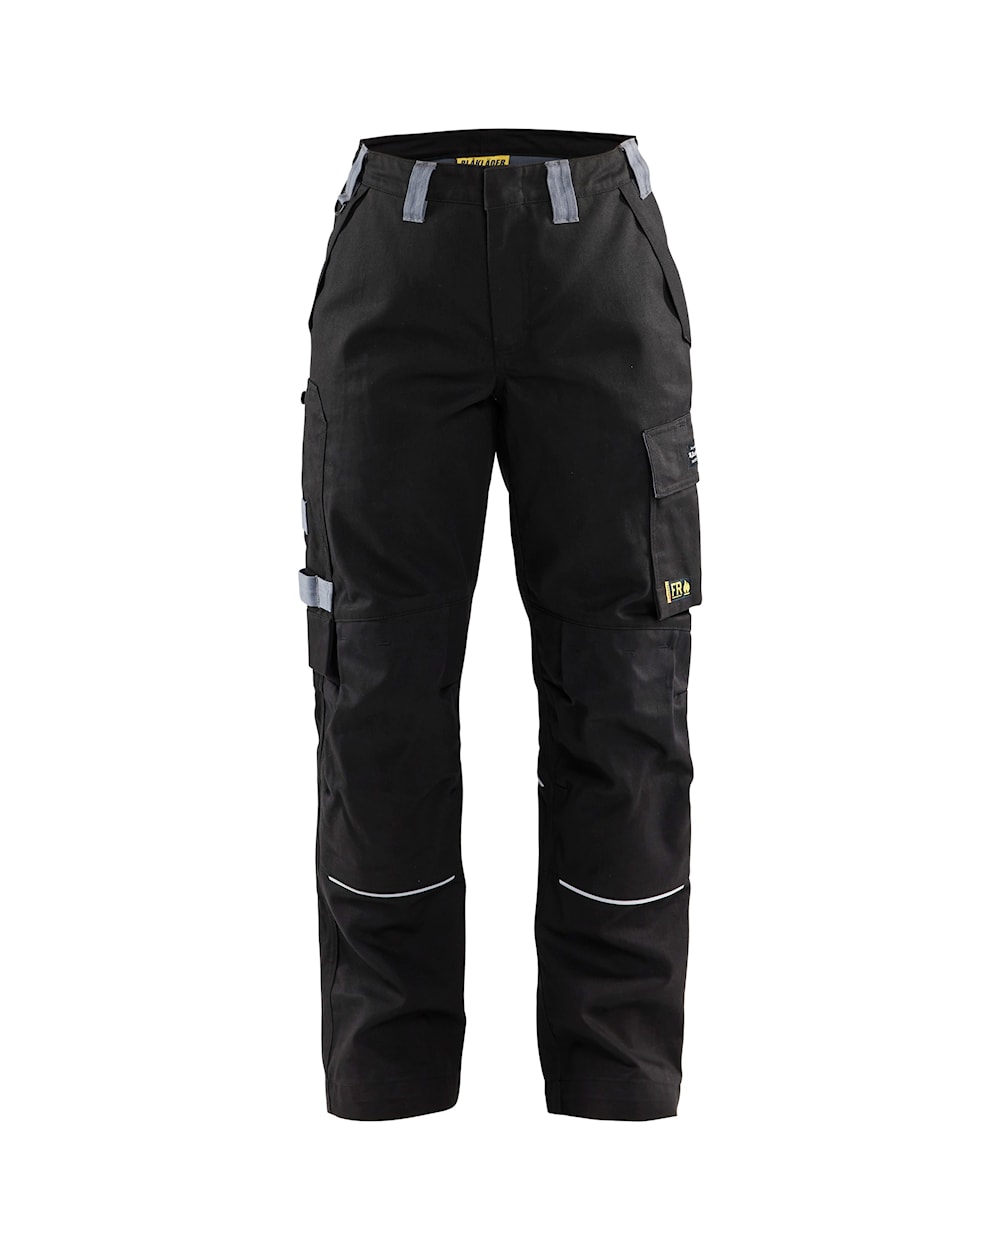 Blaklader Flame Resistant Trousers Women 7173